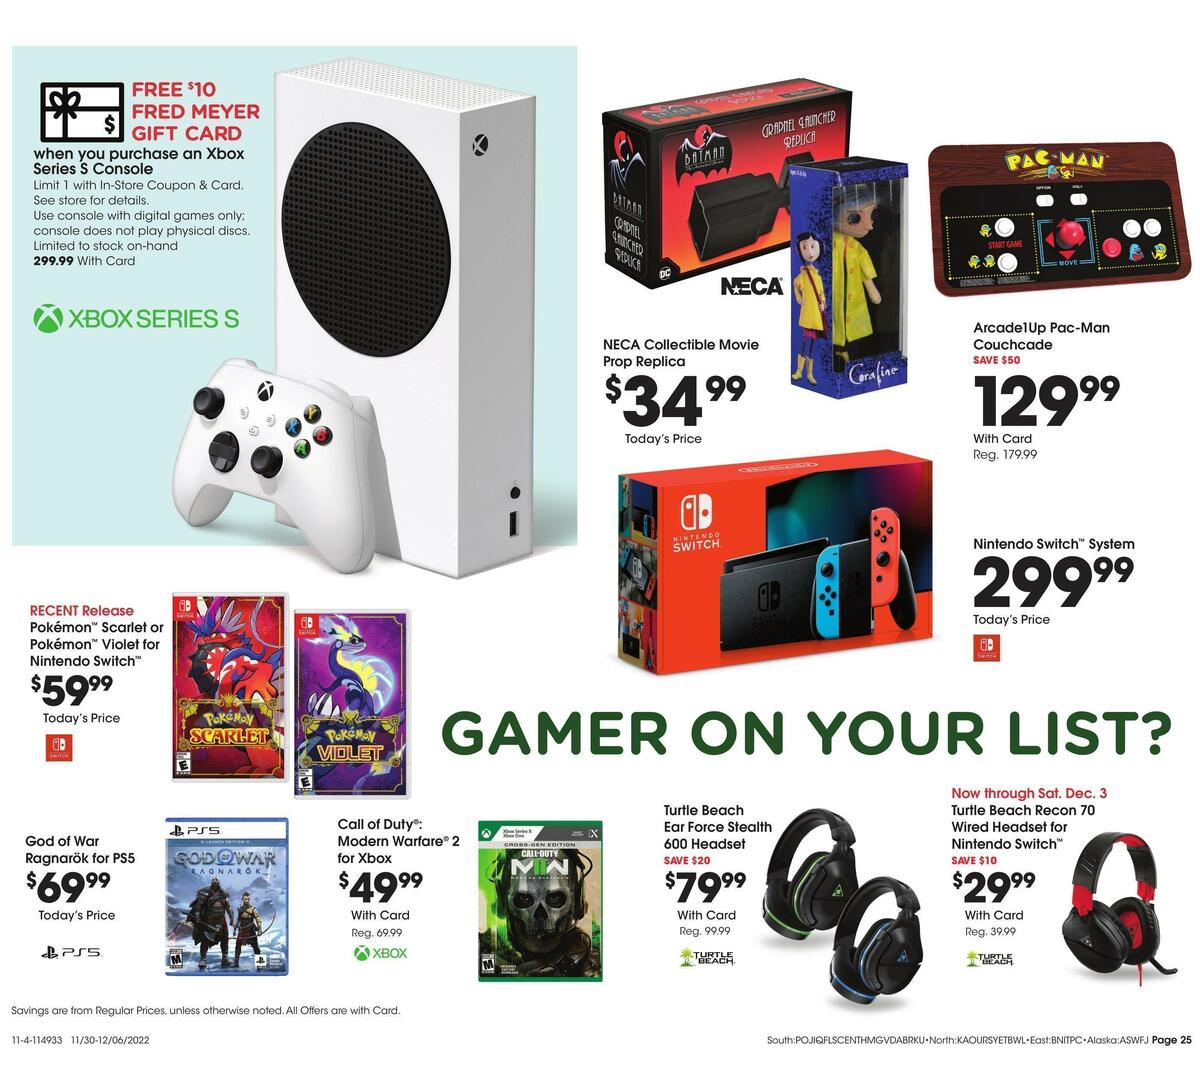 Fred Meyer General Merchandise Weekly Ad from November 30